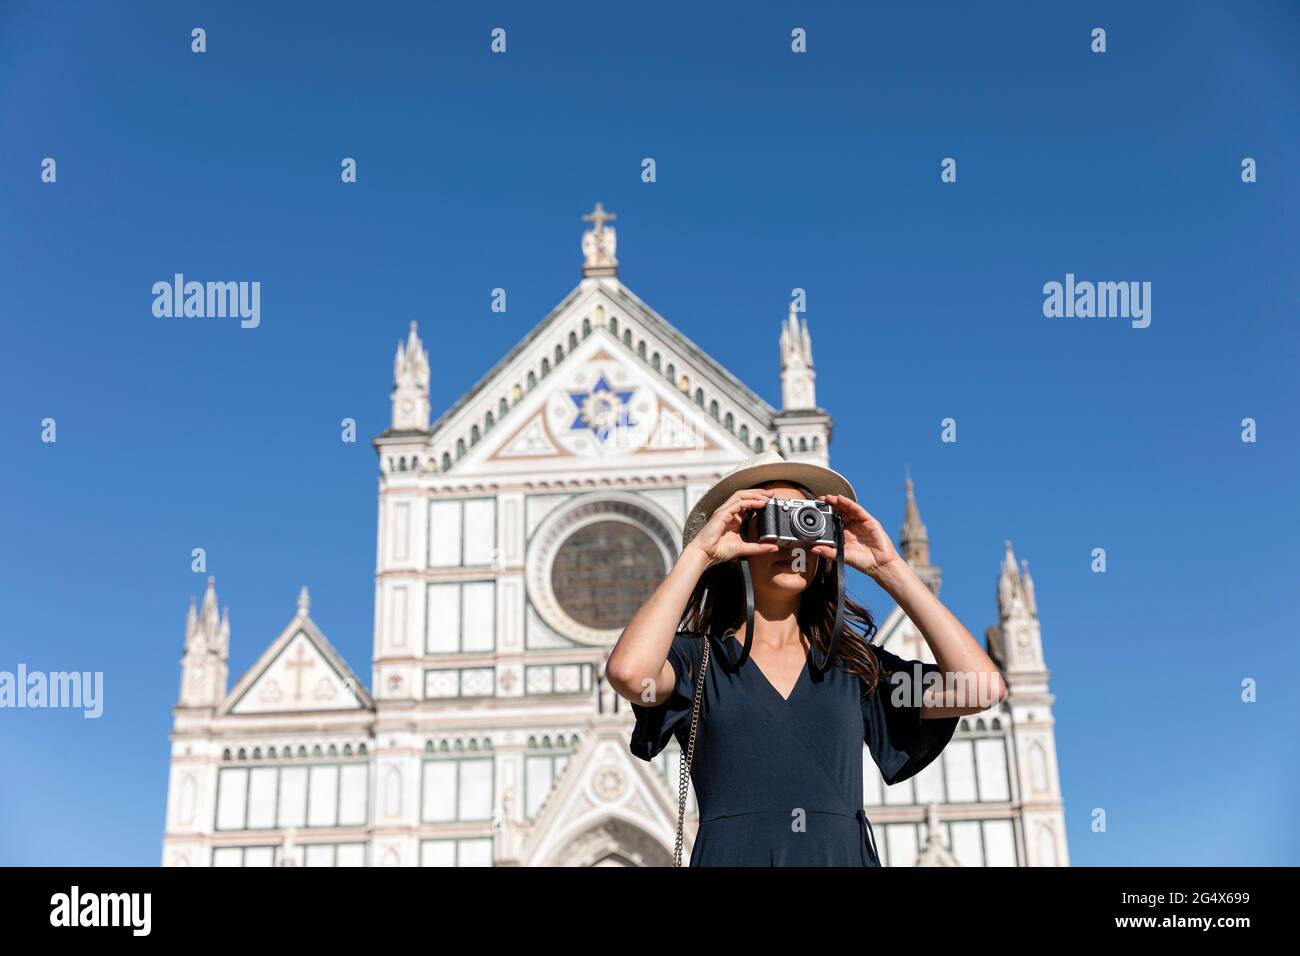 Female tourist photographing through camera in front of Basilica Of Santa Croce, Florence, Italy Stock Photo